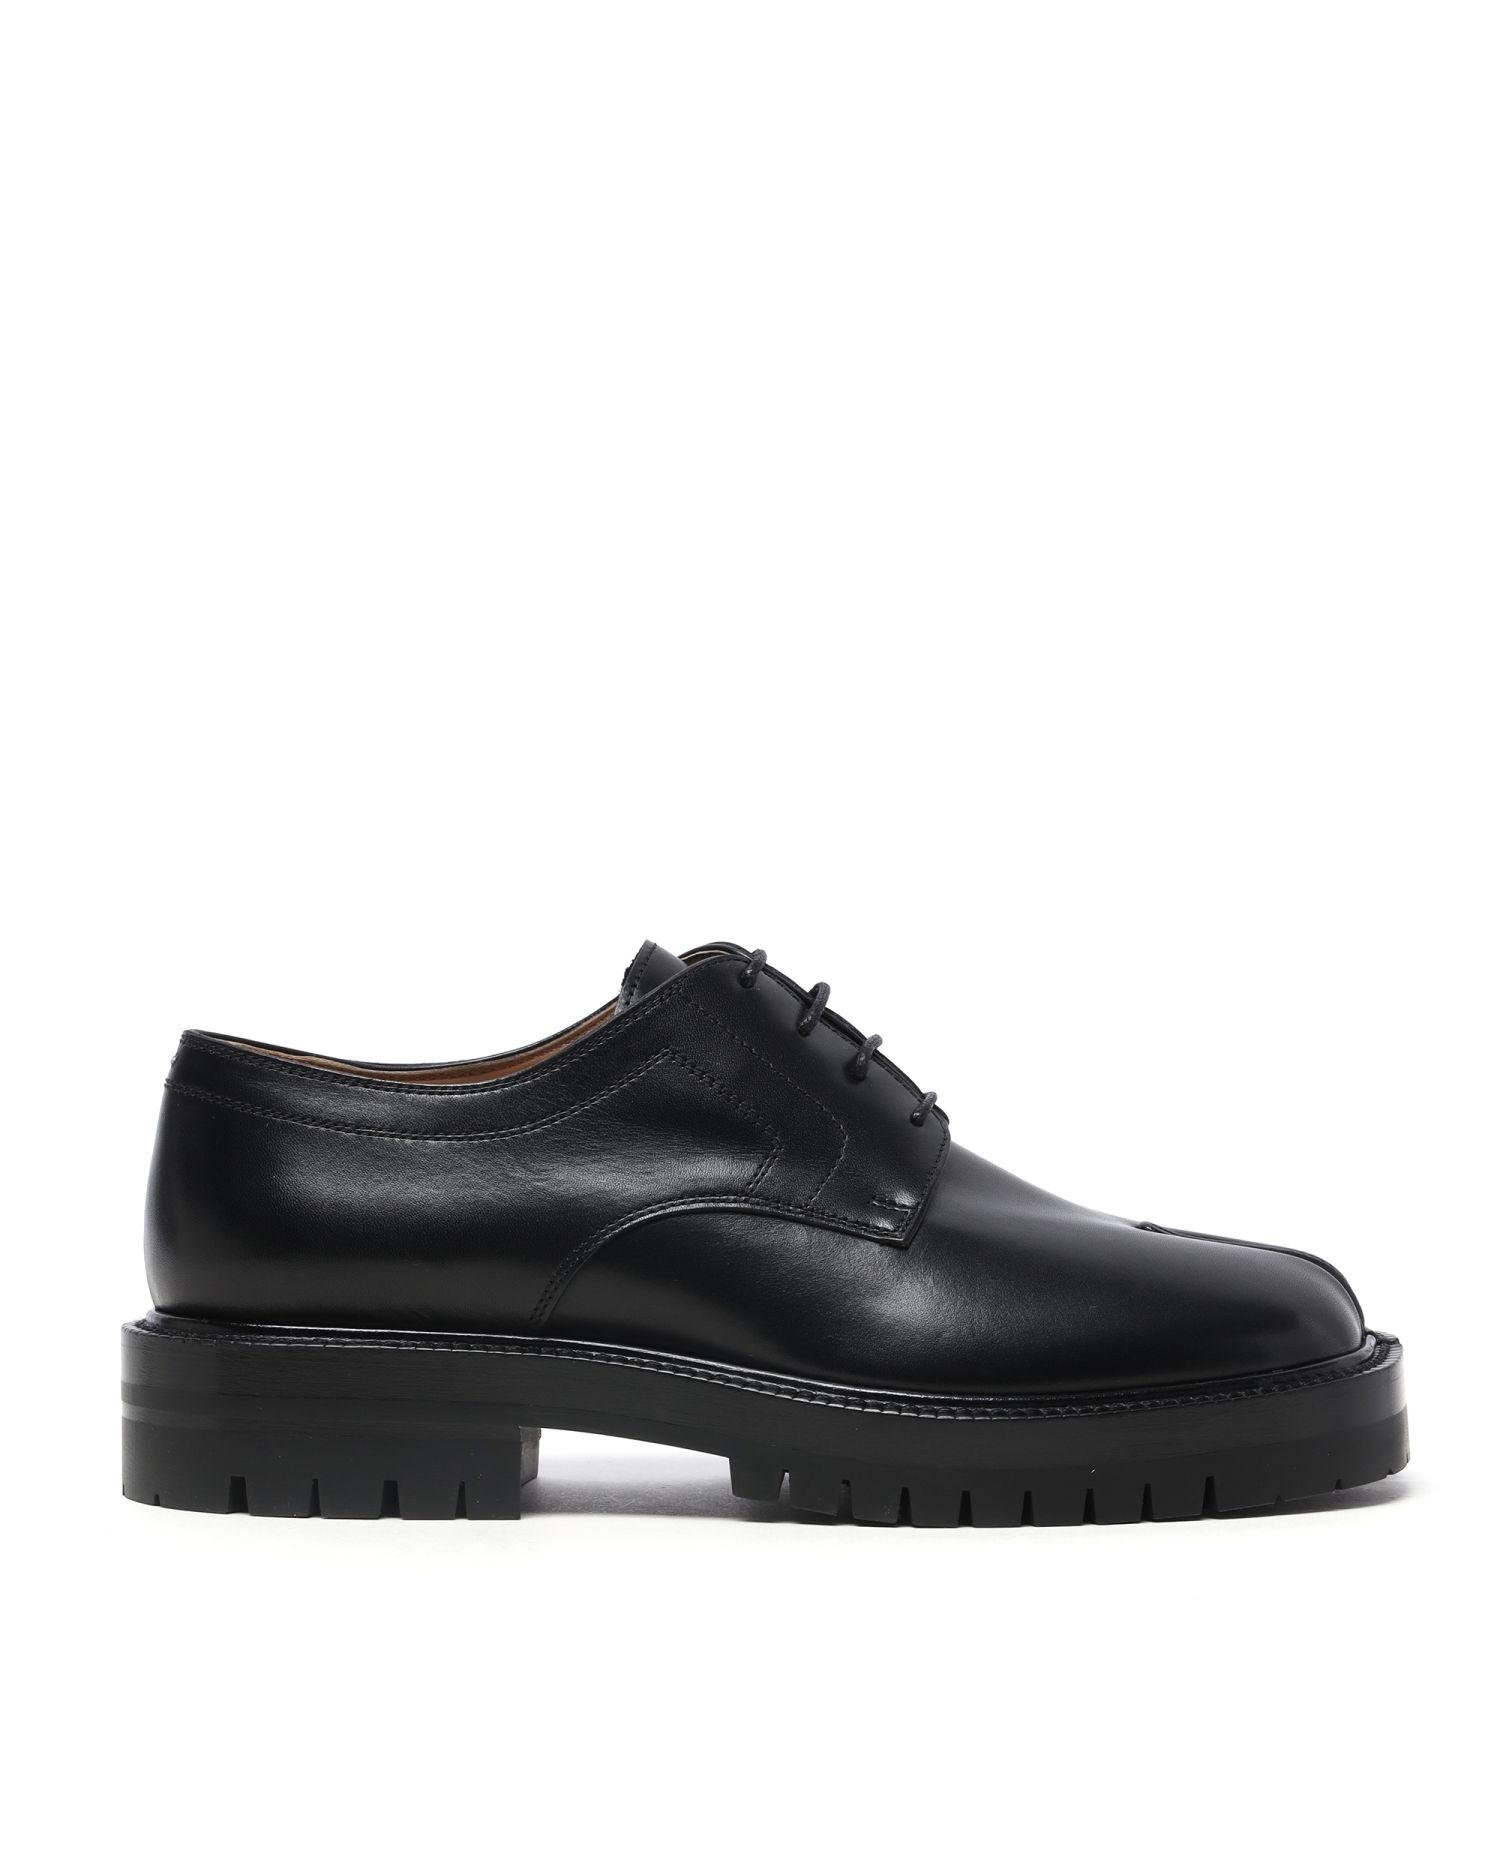 Tabi country lace-up derbys by MAISON MARGIELA